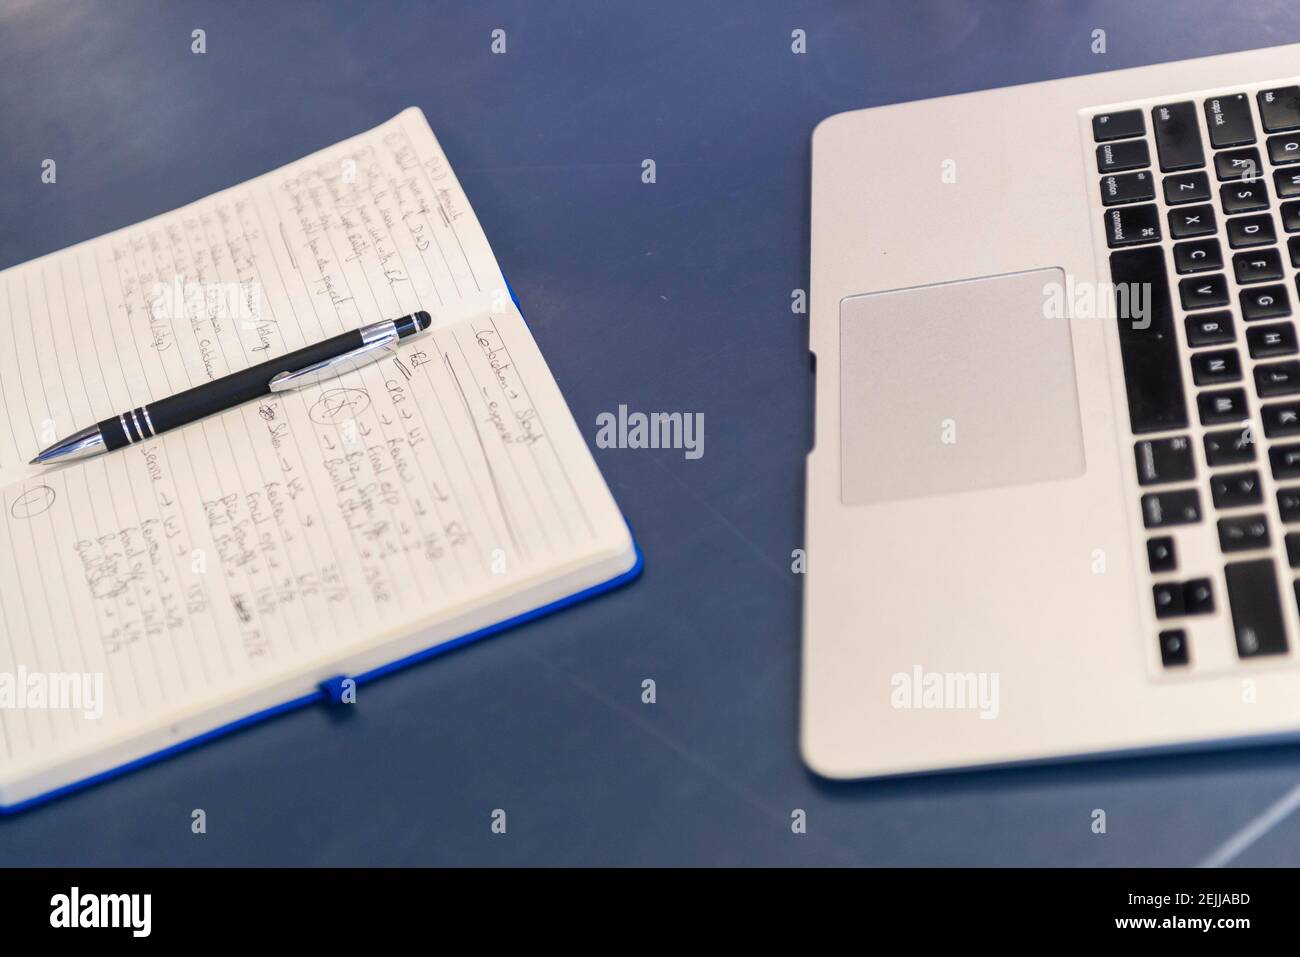 A note pad and pen on a table / desk which has notes and ideas next to a laptop Stock Photo